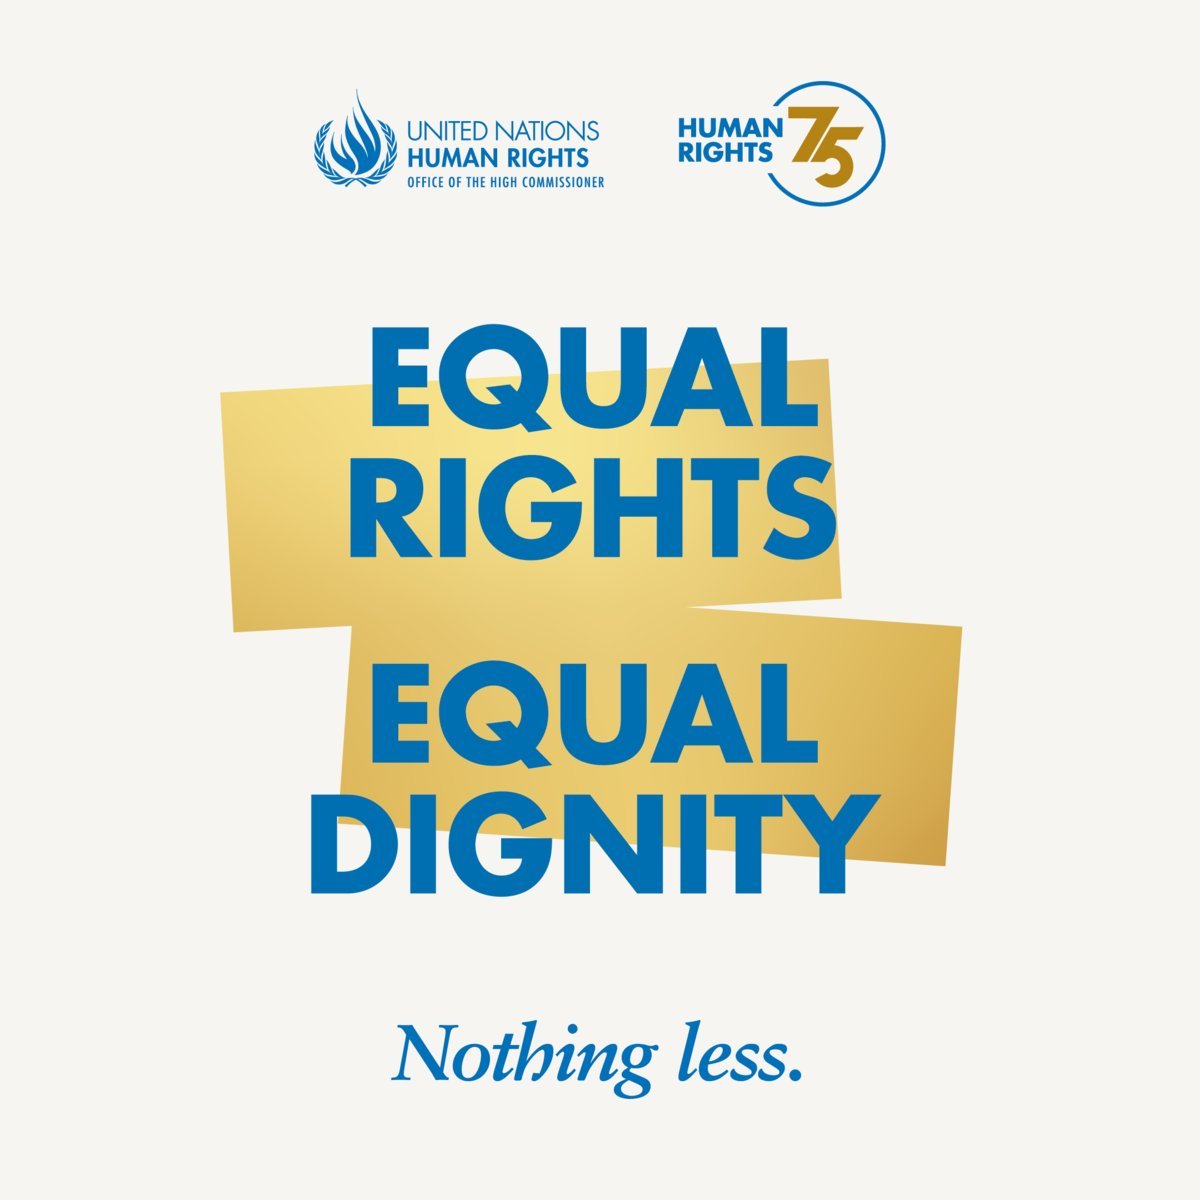 All human beings are born free and equal in dignity and rights.

Explore all the principles affirmed by the Universal Declaration of Human Rights: un.org/en/about-us/un… #StandUpForHumanRights